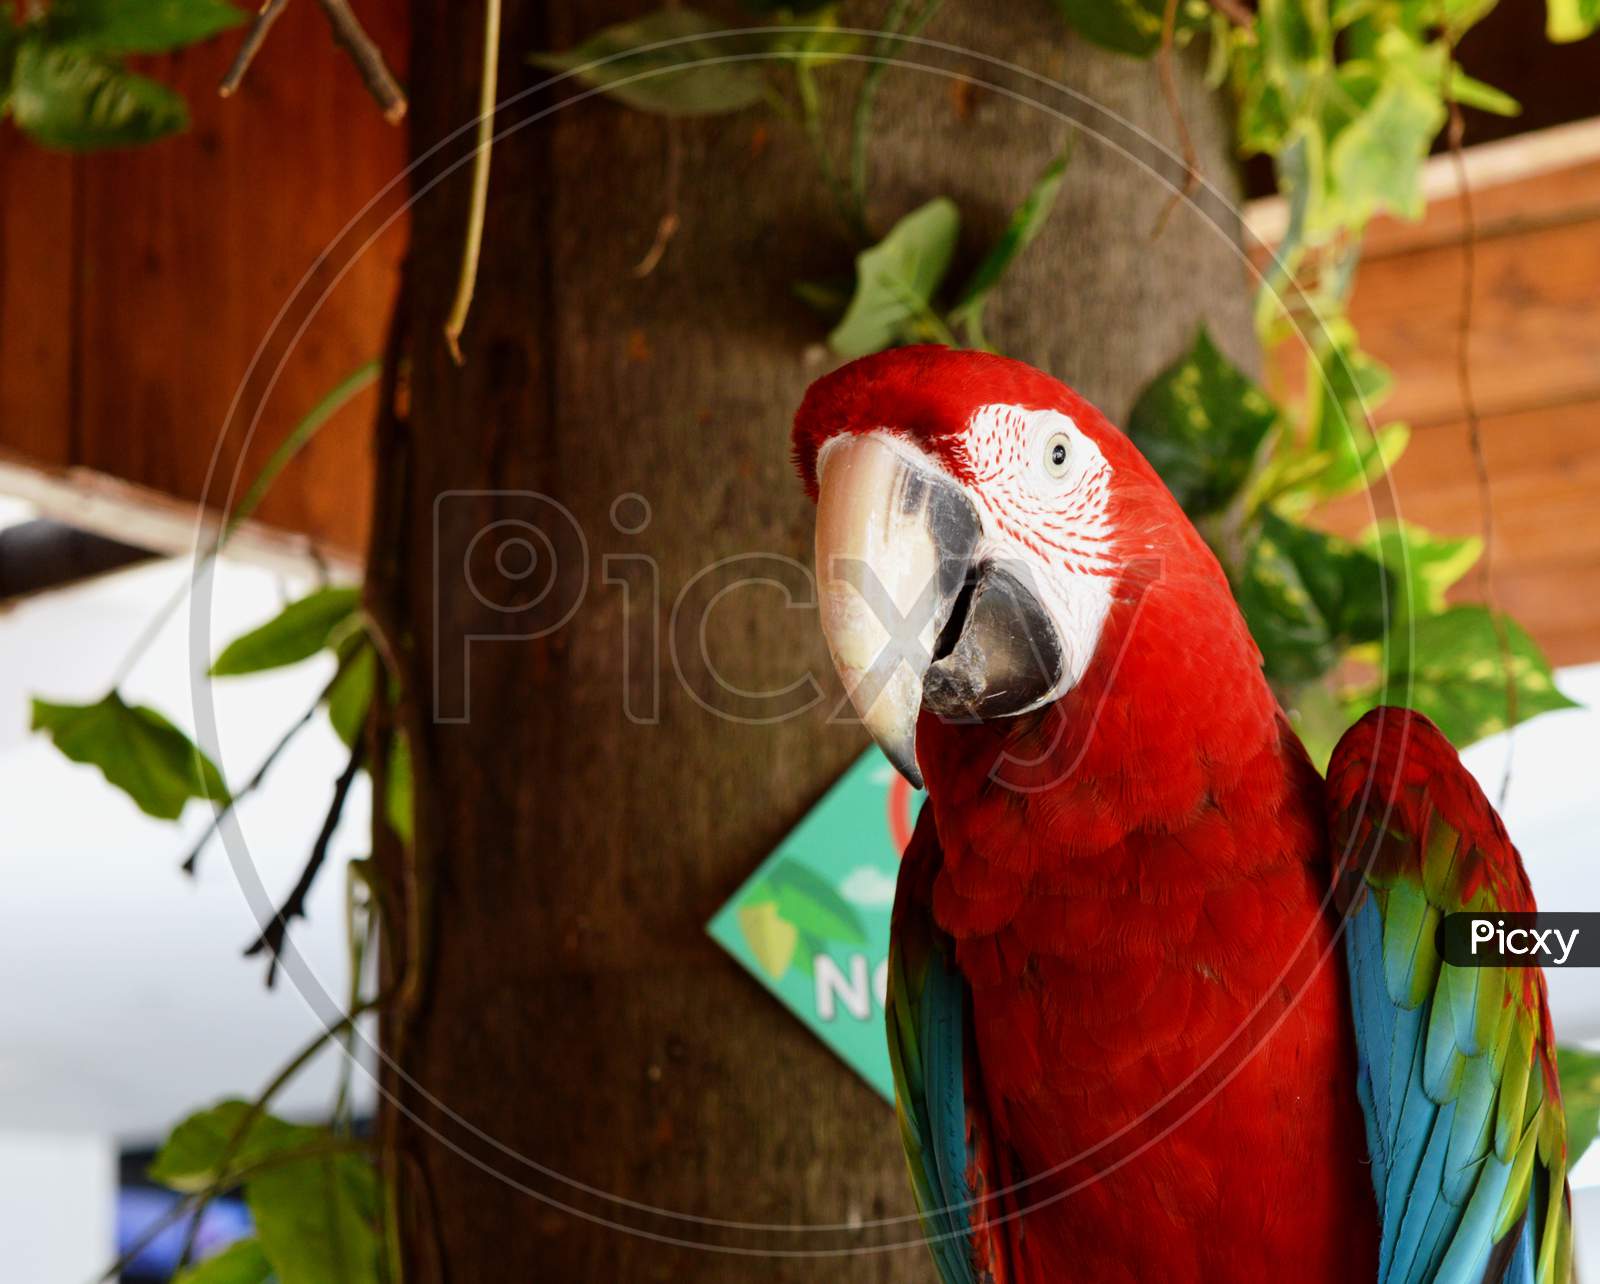 A red parrot